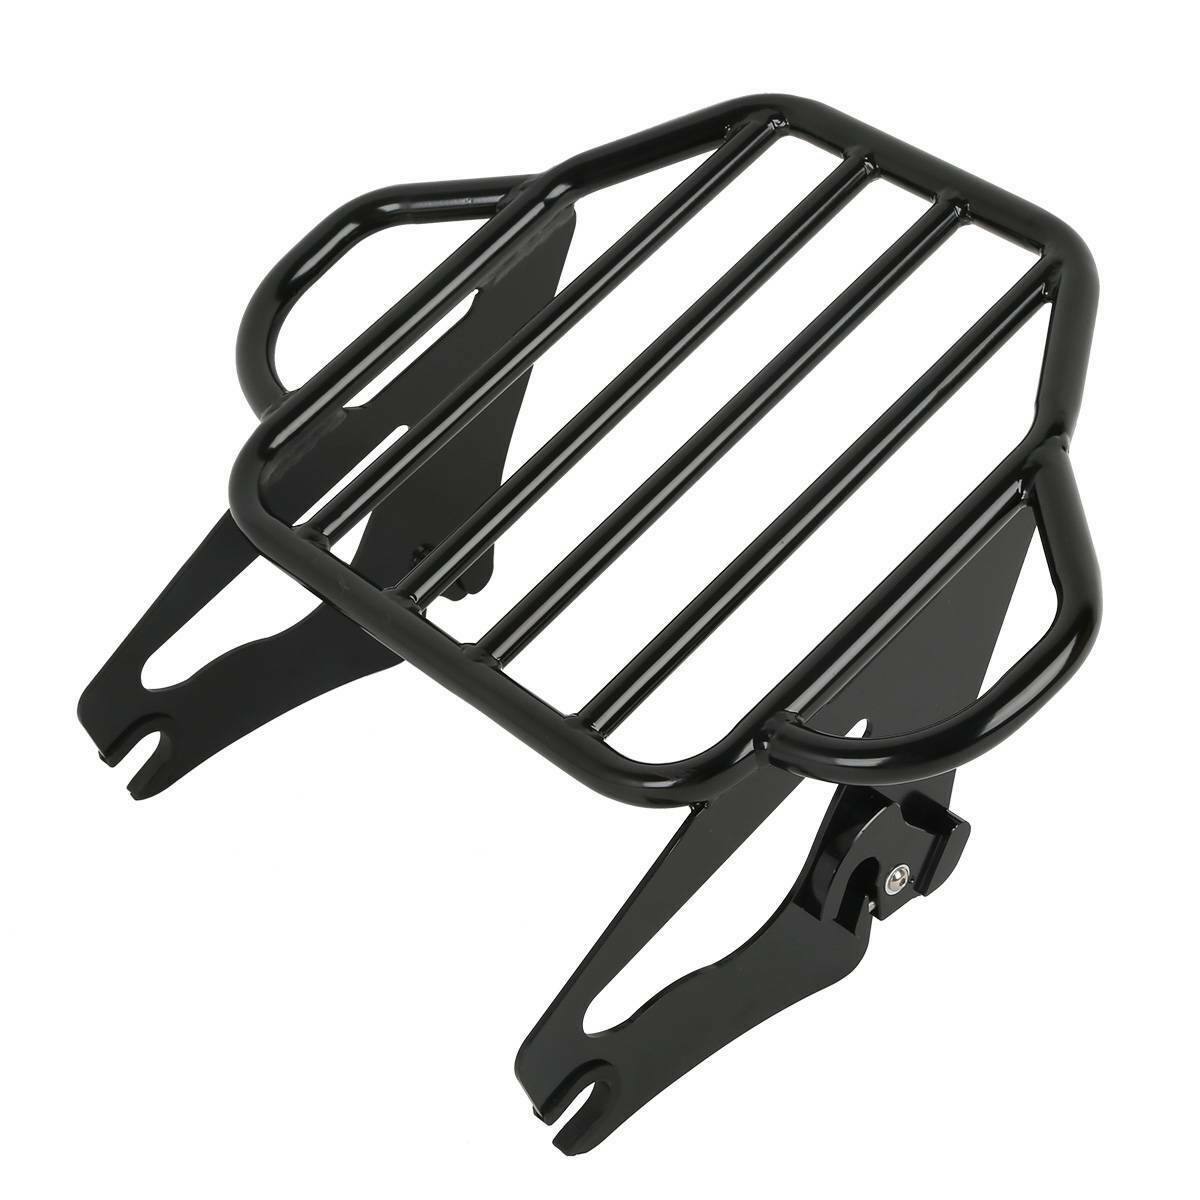 Sissy Bar Backrest Pad Luggage Rack Docking Kit Fit For Harley Touring 2014-2022 - Moto Life Products